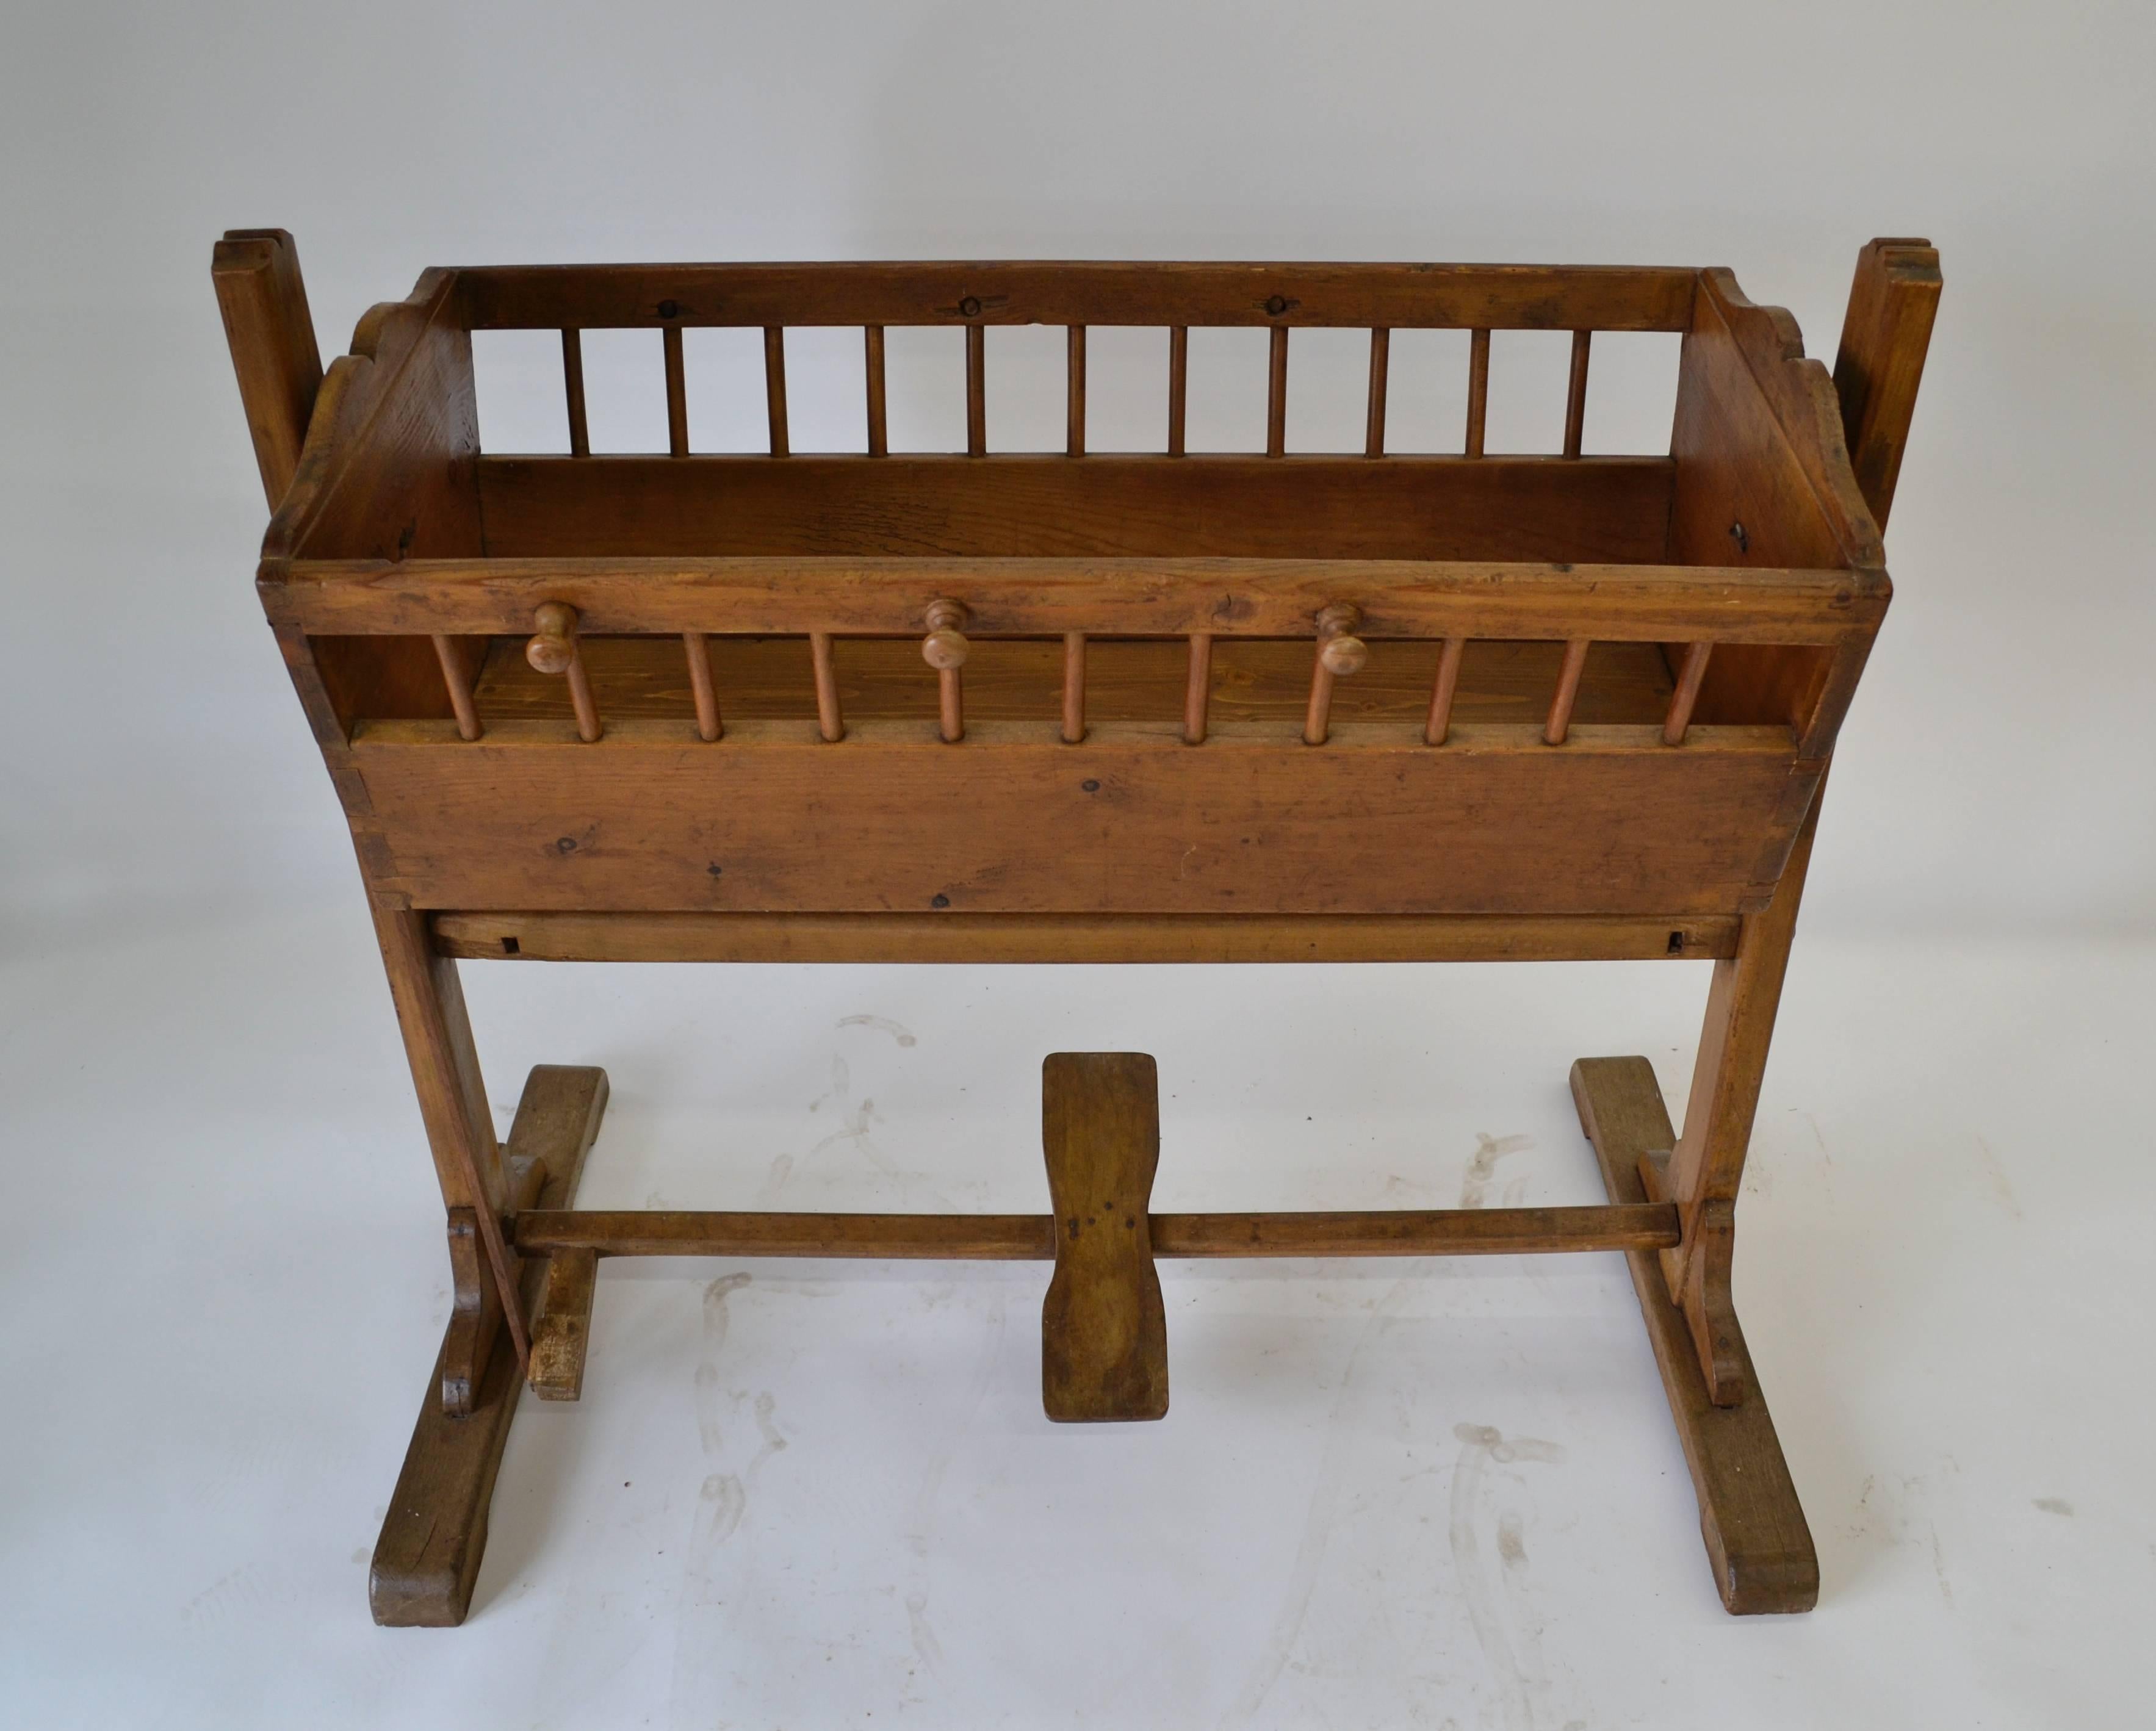 An outstanding pine cradle on a trestle base of oak and beechwood, in almost entirely original condition. Operating the treadle gives a gentle swinging motion to the cradle; when stationary a wooden peg holds the cradle still. Five of the six turned